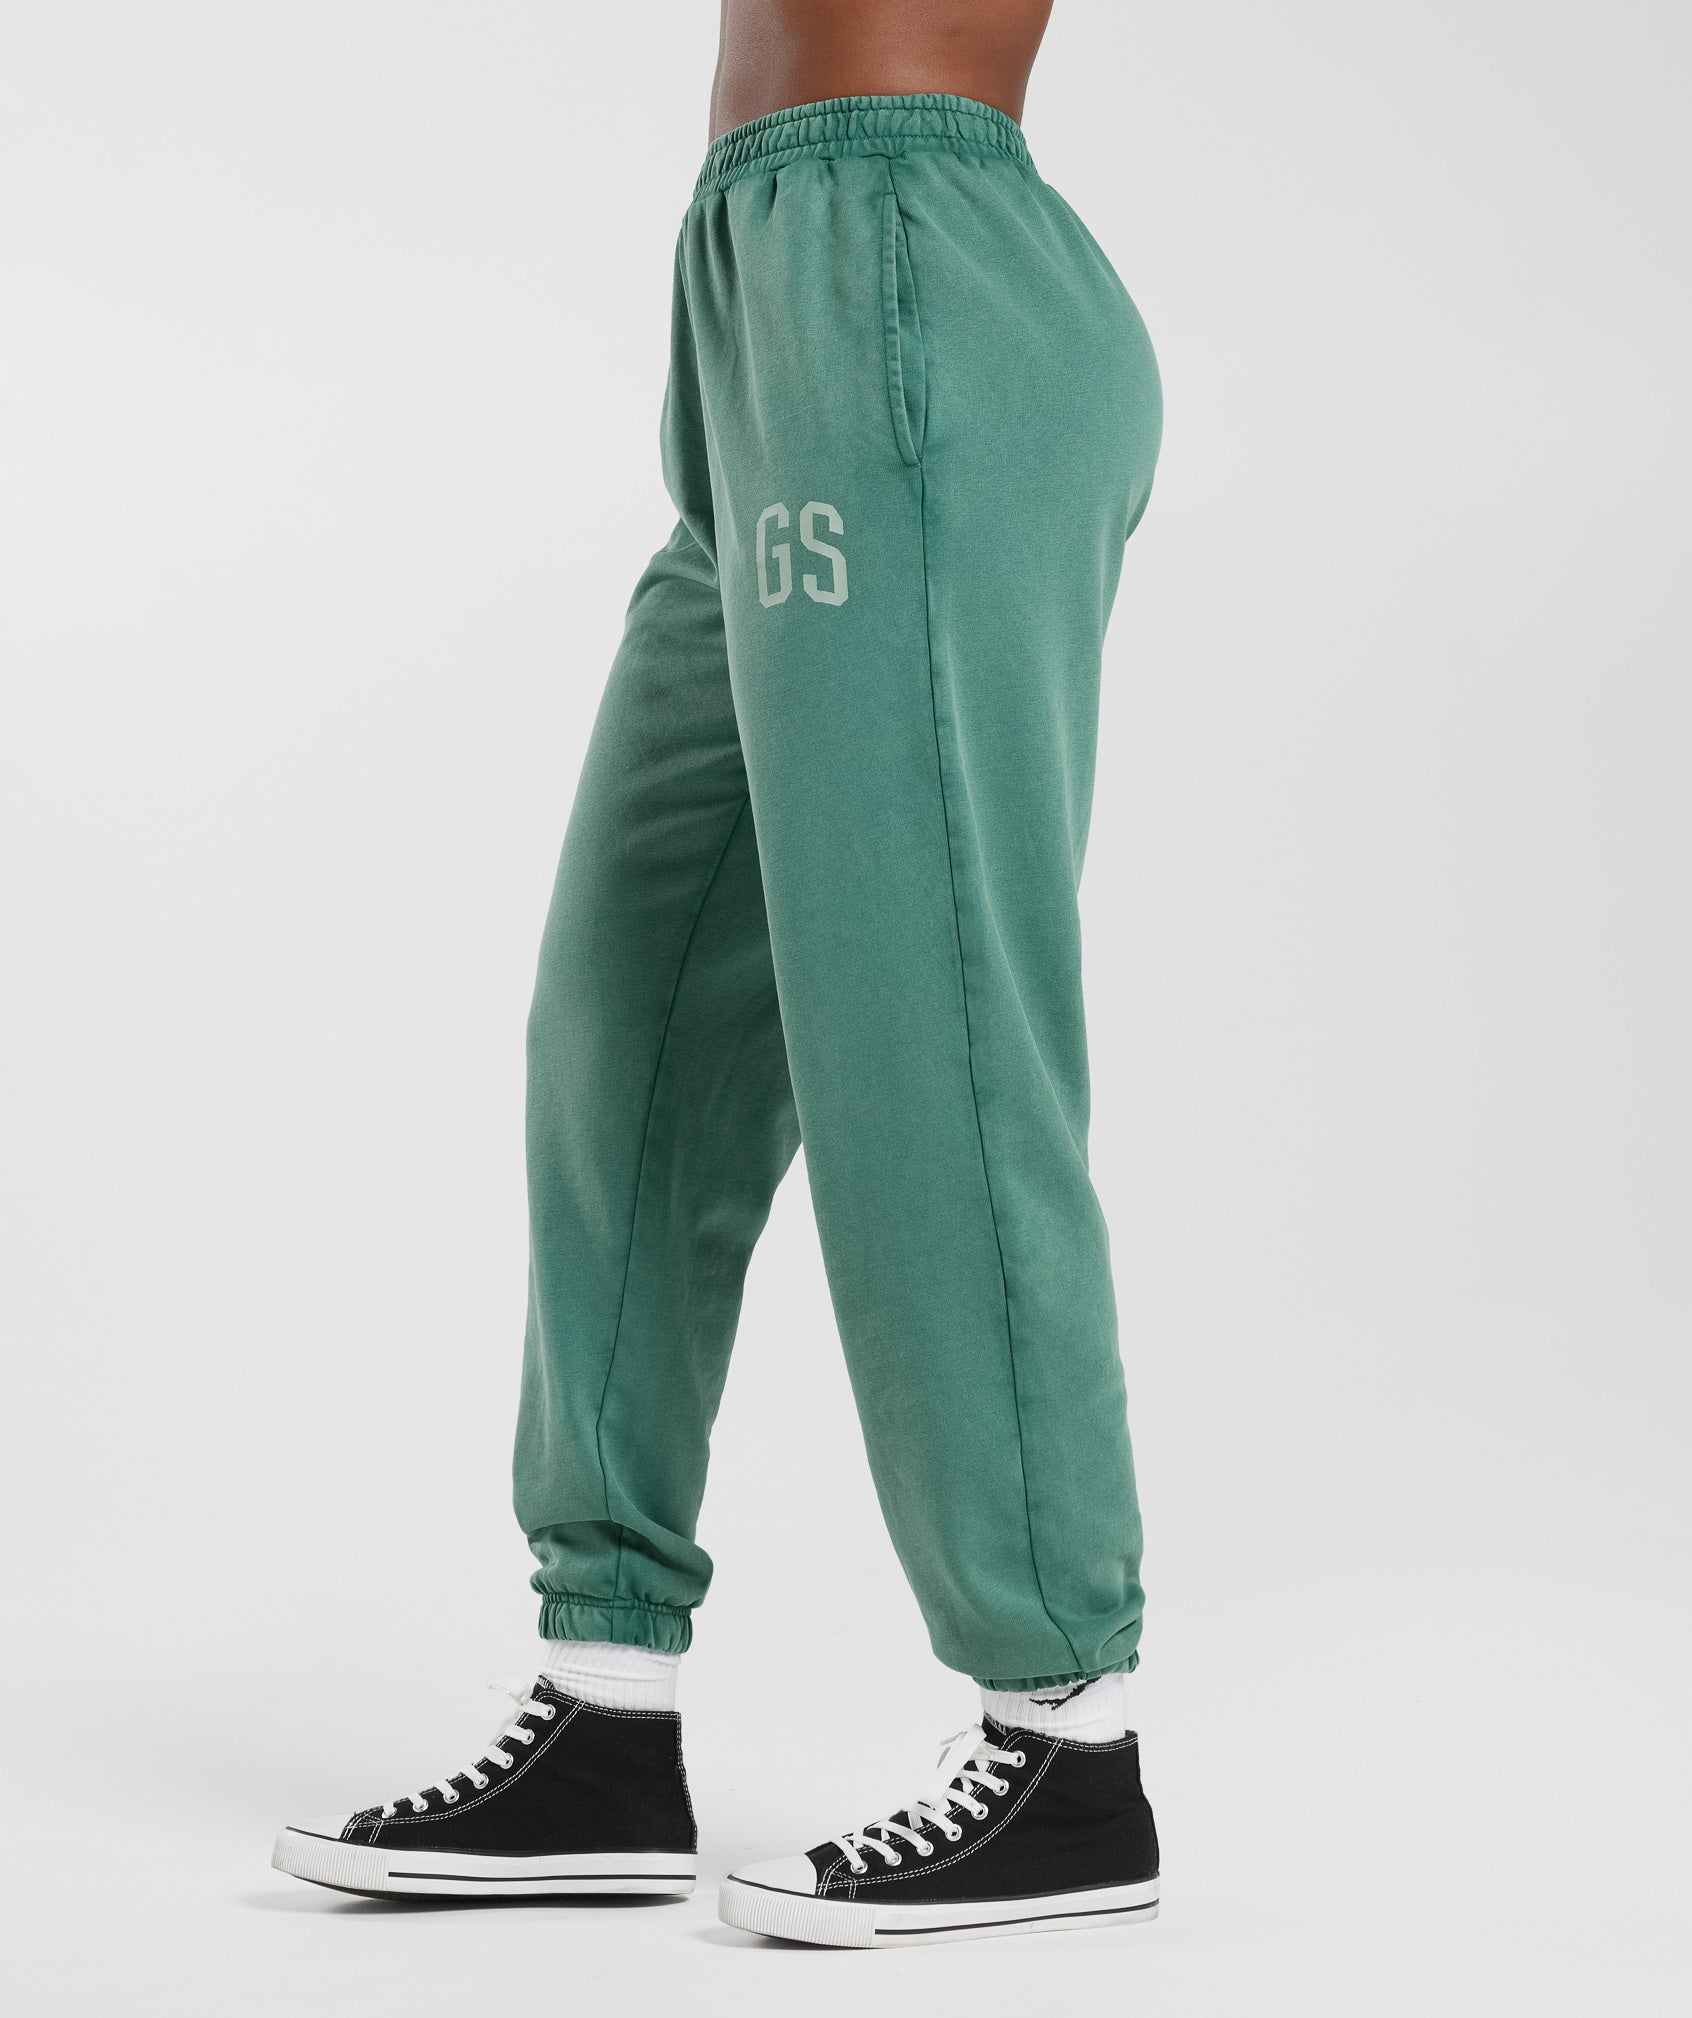 Collegiate Joggers in Ink Teal - view 3